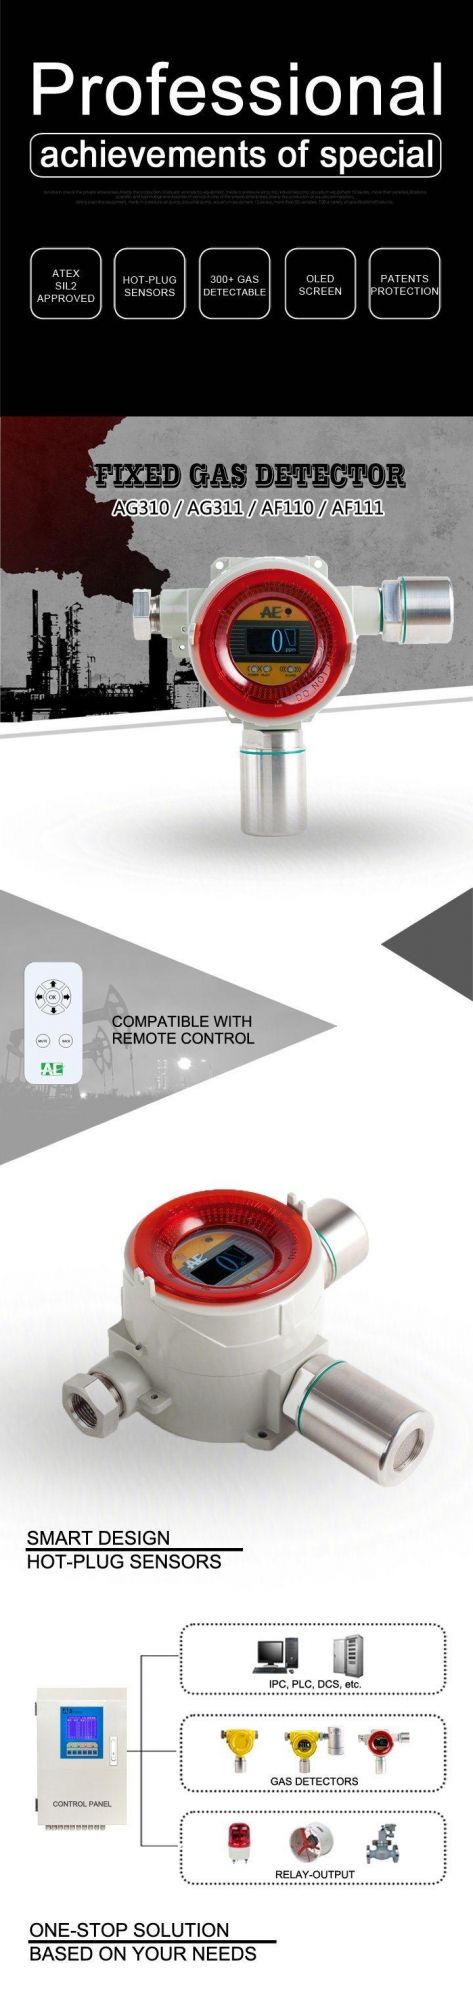 Atex Approved Fixed Combustible Gas Detector with OLED Display